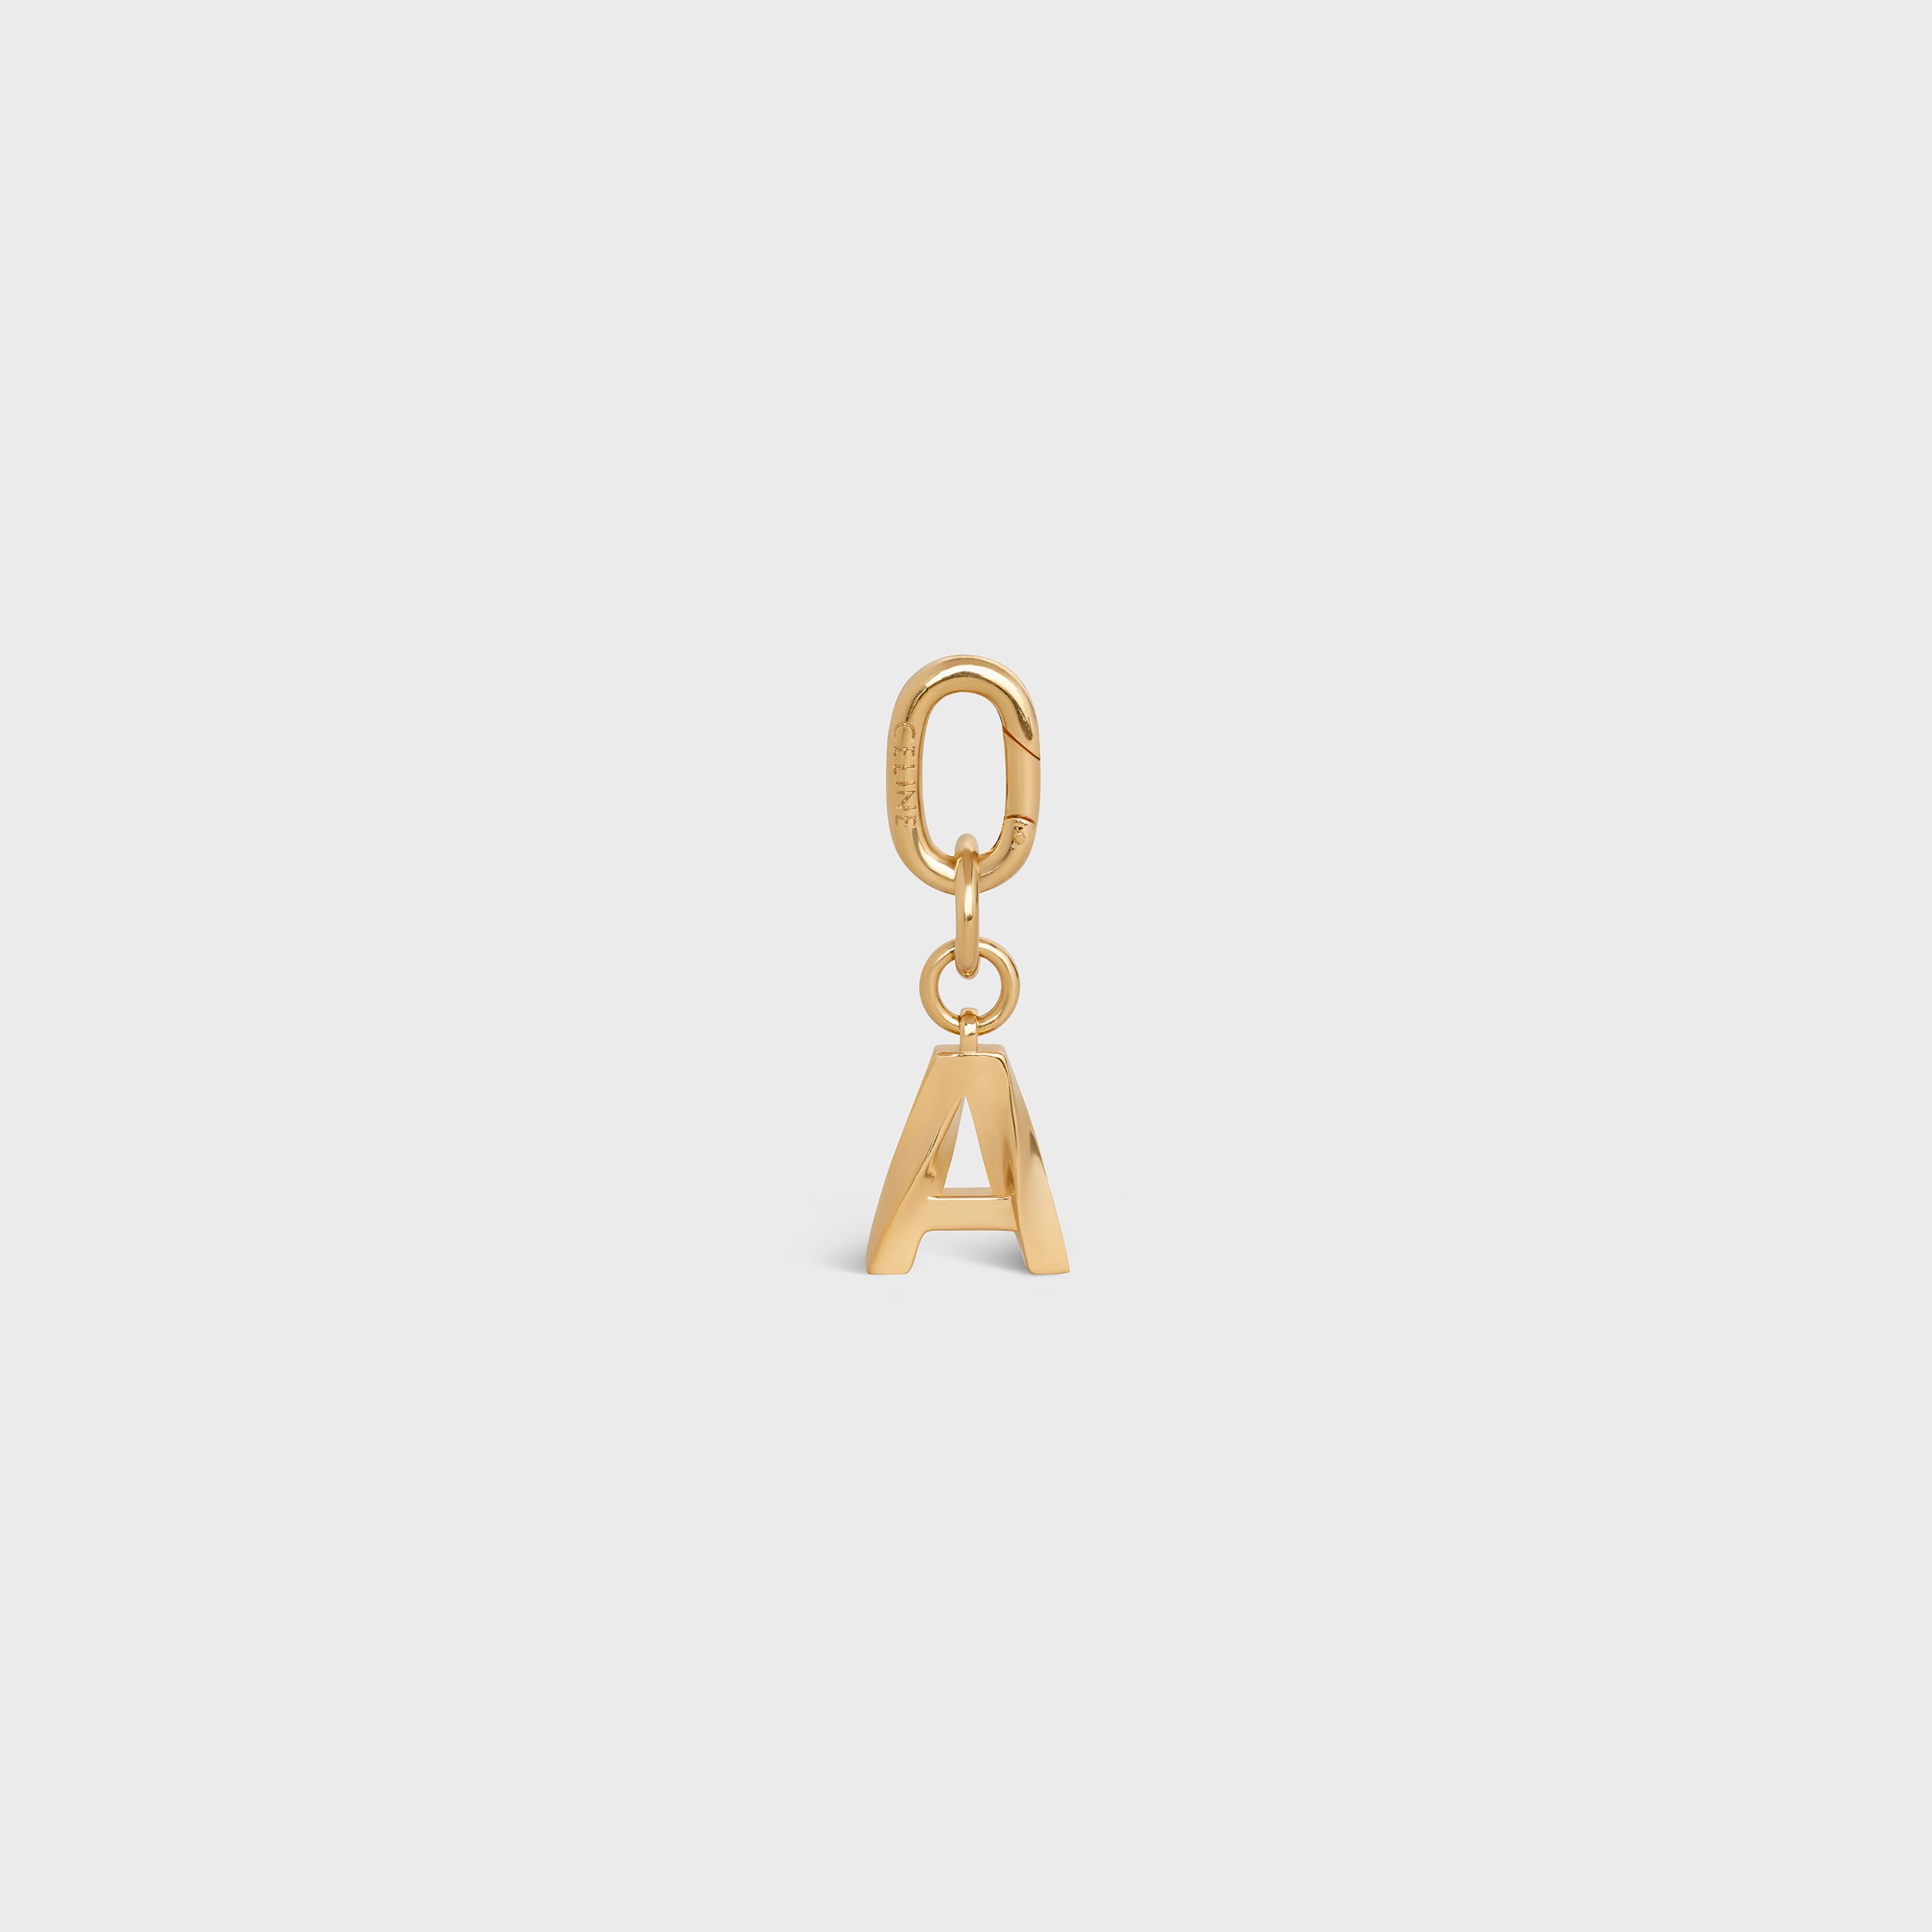 A CHARM in Brass - 1